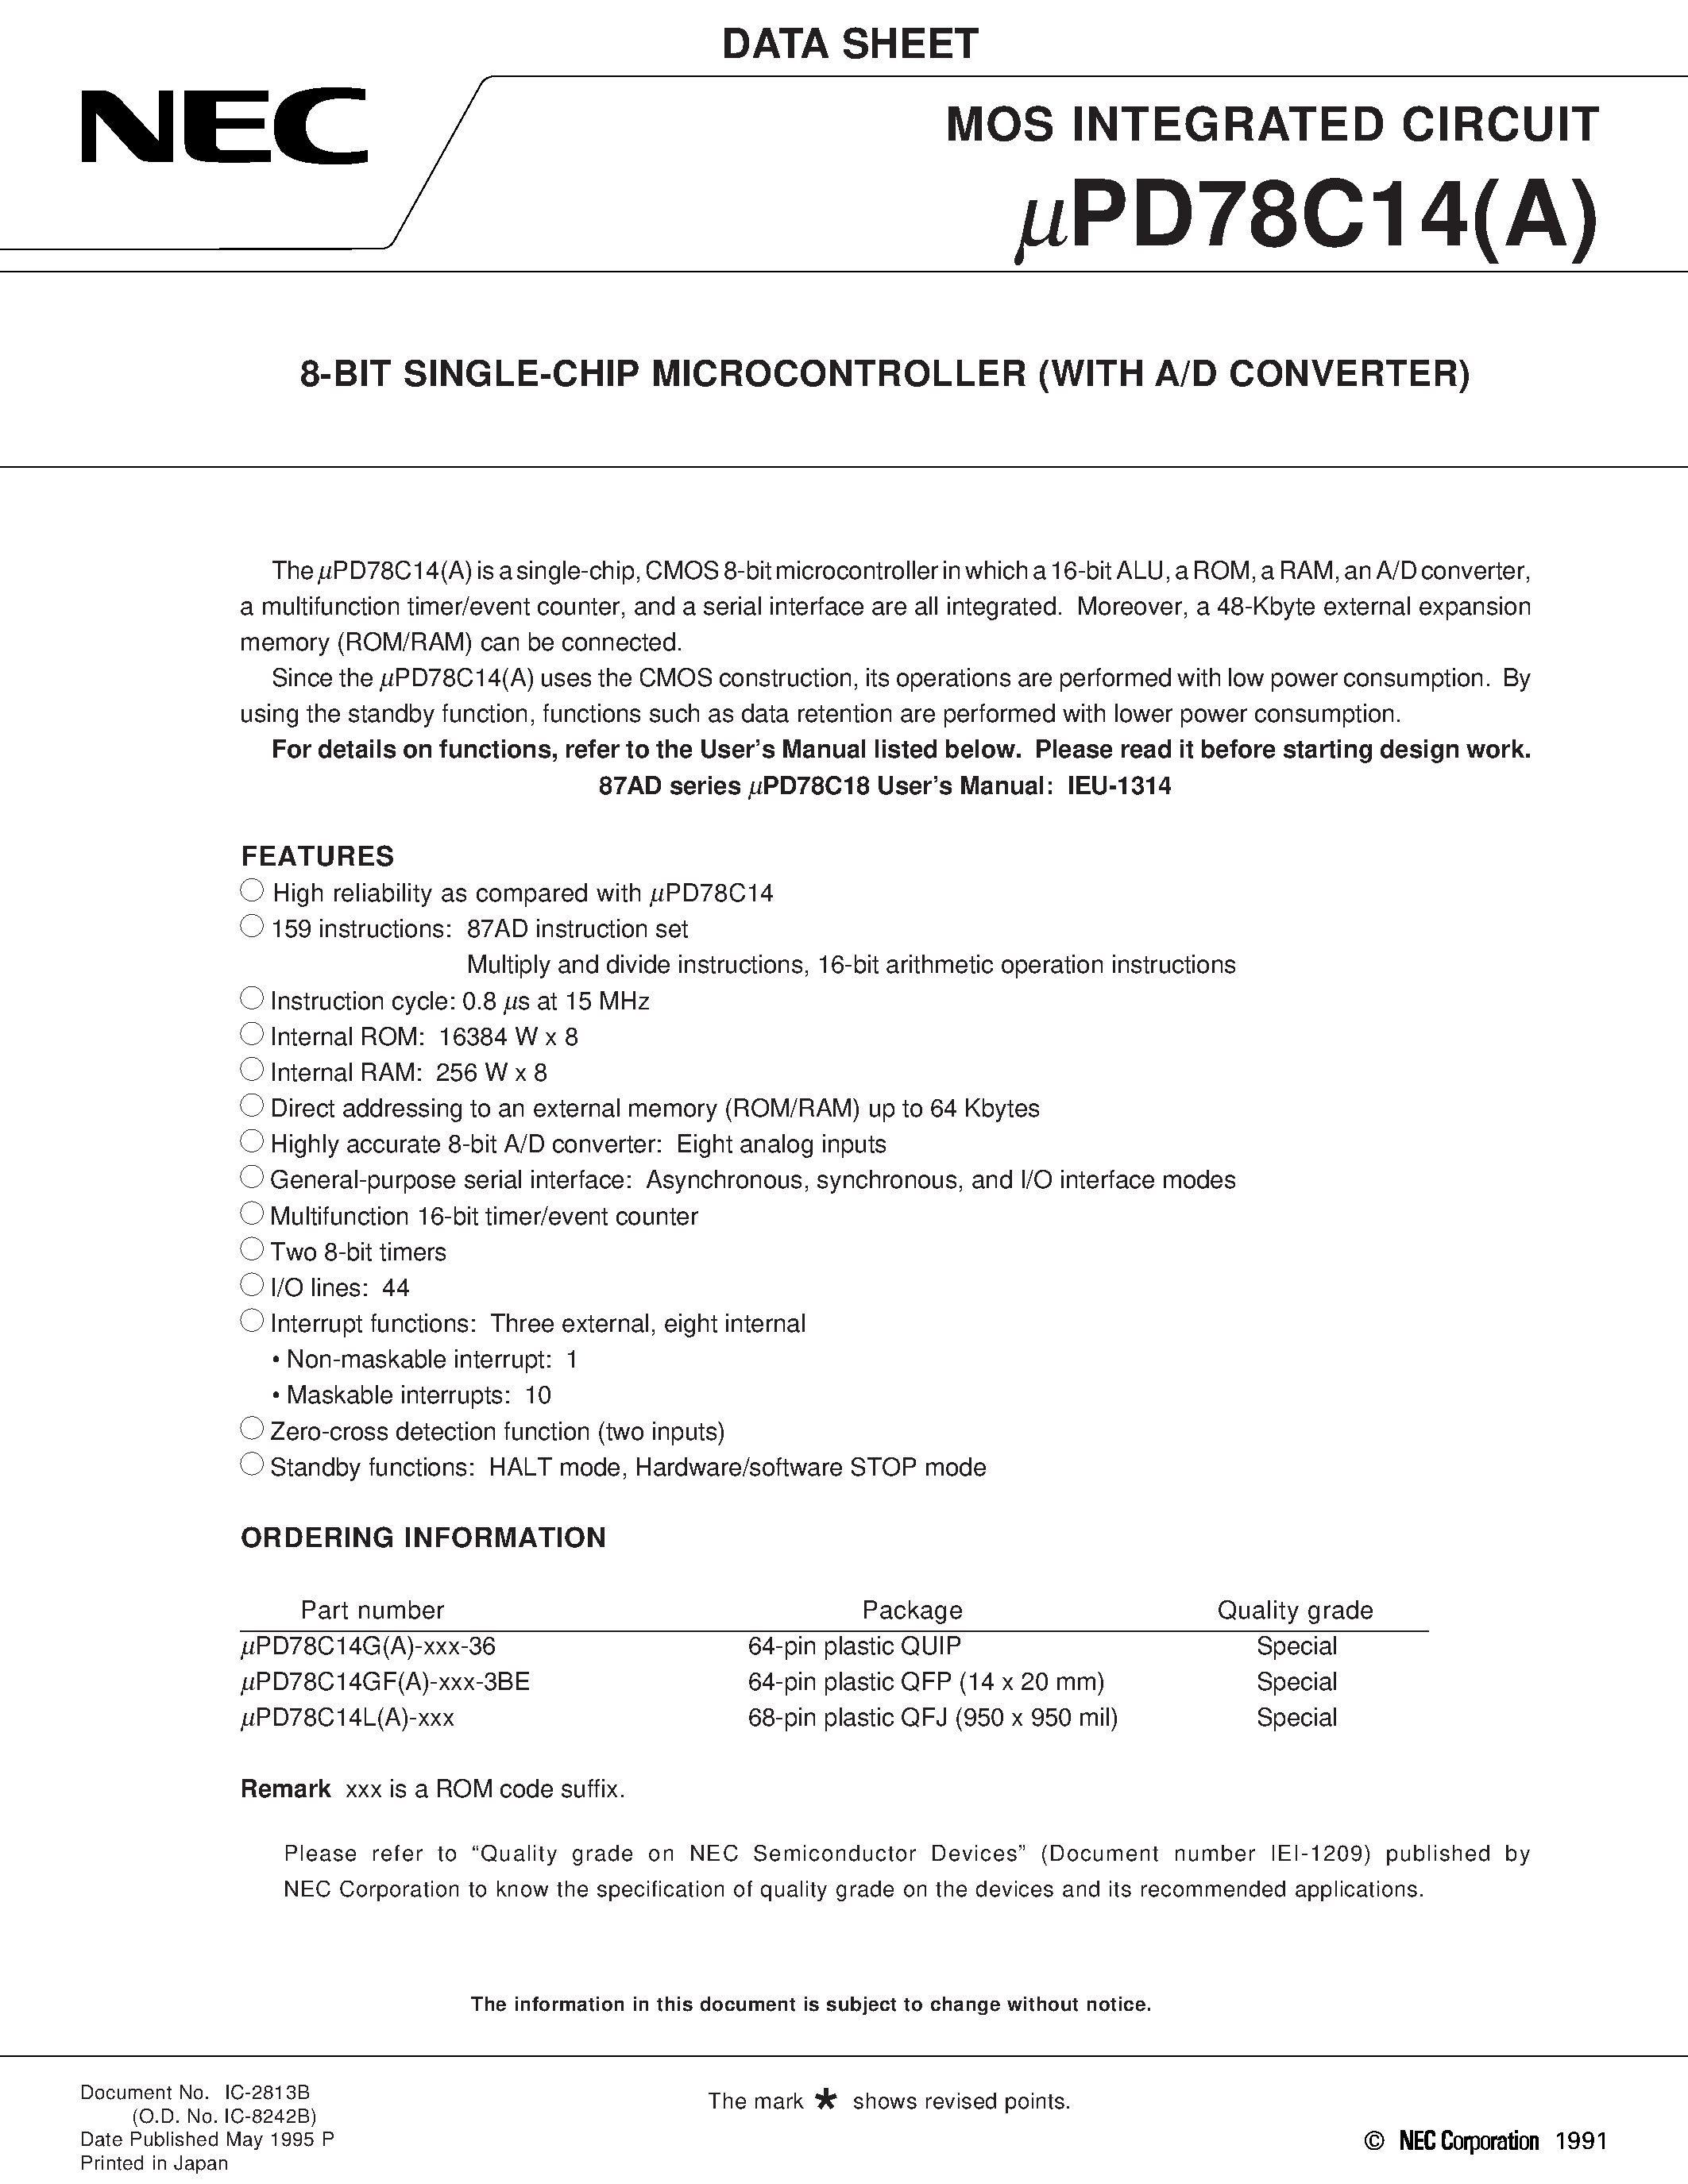 Datasheet UPD78C14 - 8-BIT SINGLE-CHIP MICROCONTROLLER WITH A/D CONVERTER page 1